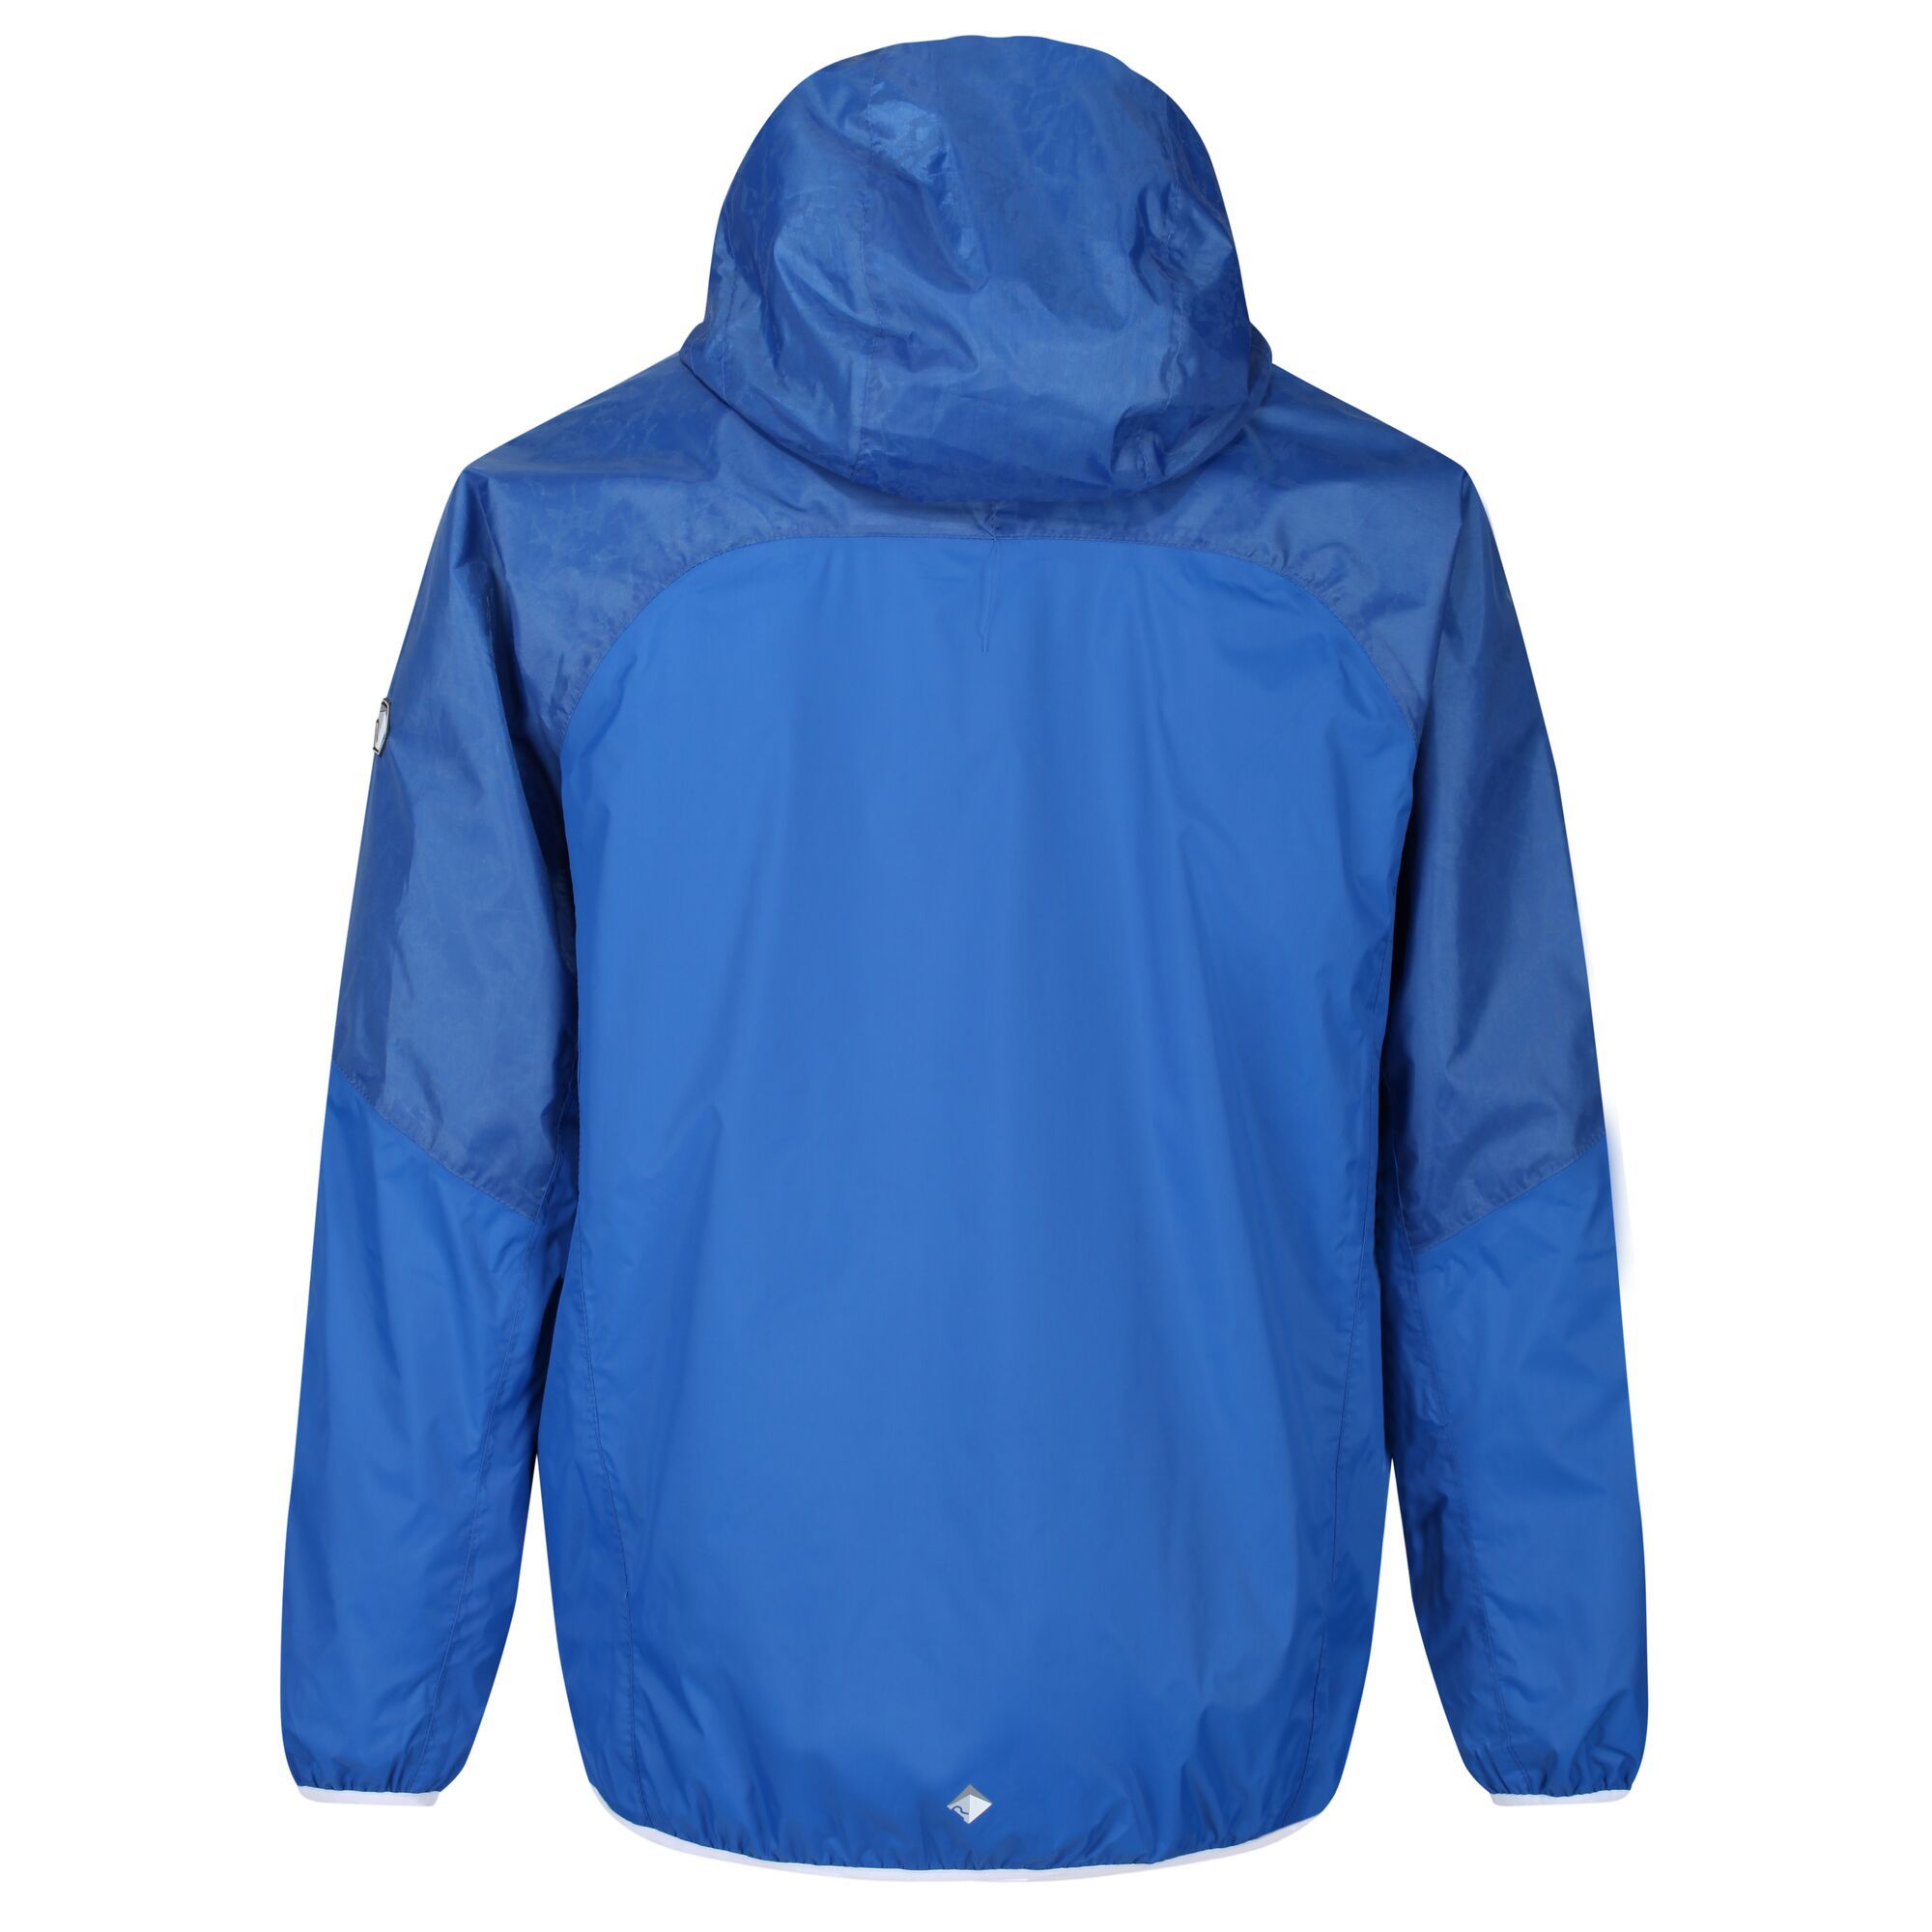 Waterproof hooded jacket with stretch trim on hood, cuffs, and hem. Made from lightweight Isolite 5000 fabric. Mesh lining on hood. Ideal for wet weather or as a light layer. 100% polyamide. Hand wash.